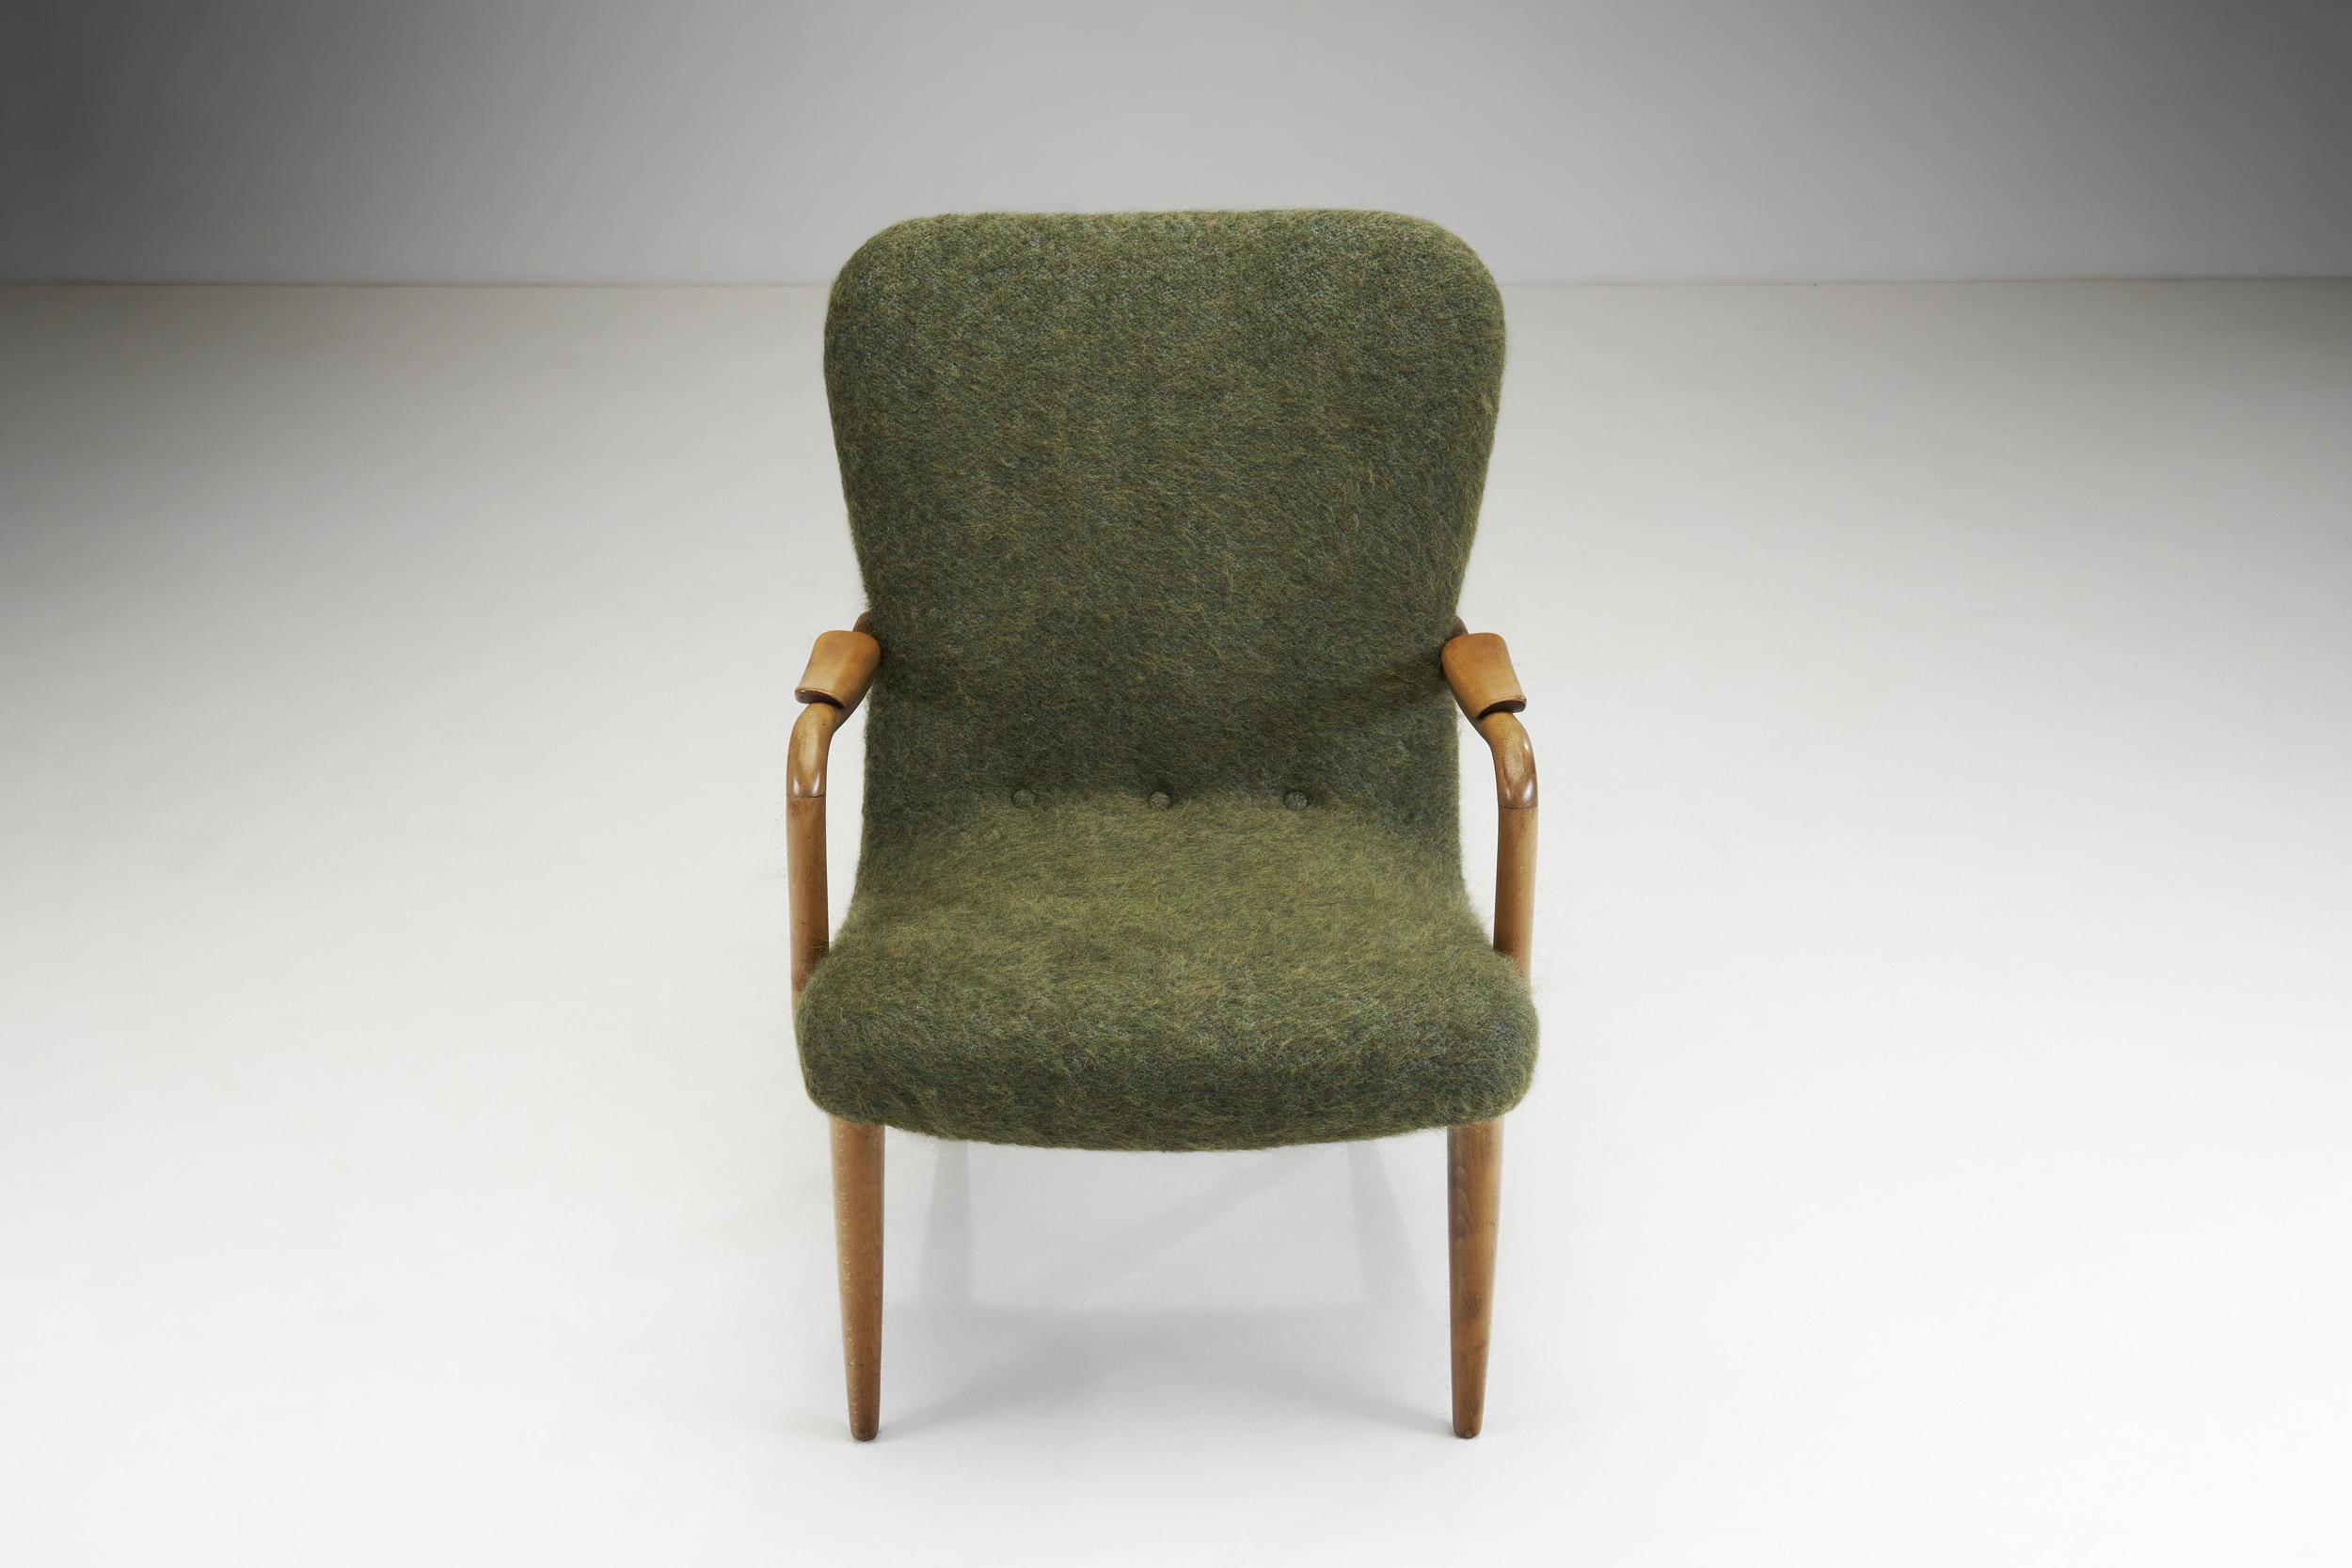 Fabric Danish Upholstered Easy Chair with Stained Beech Frame, Denmark, 1950s For Sale